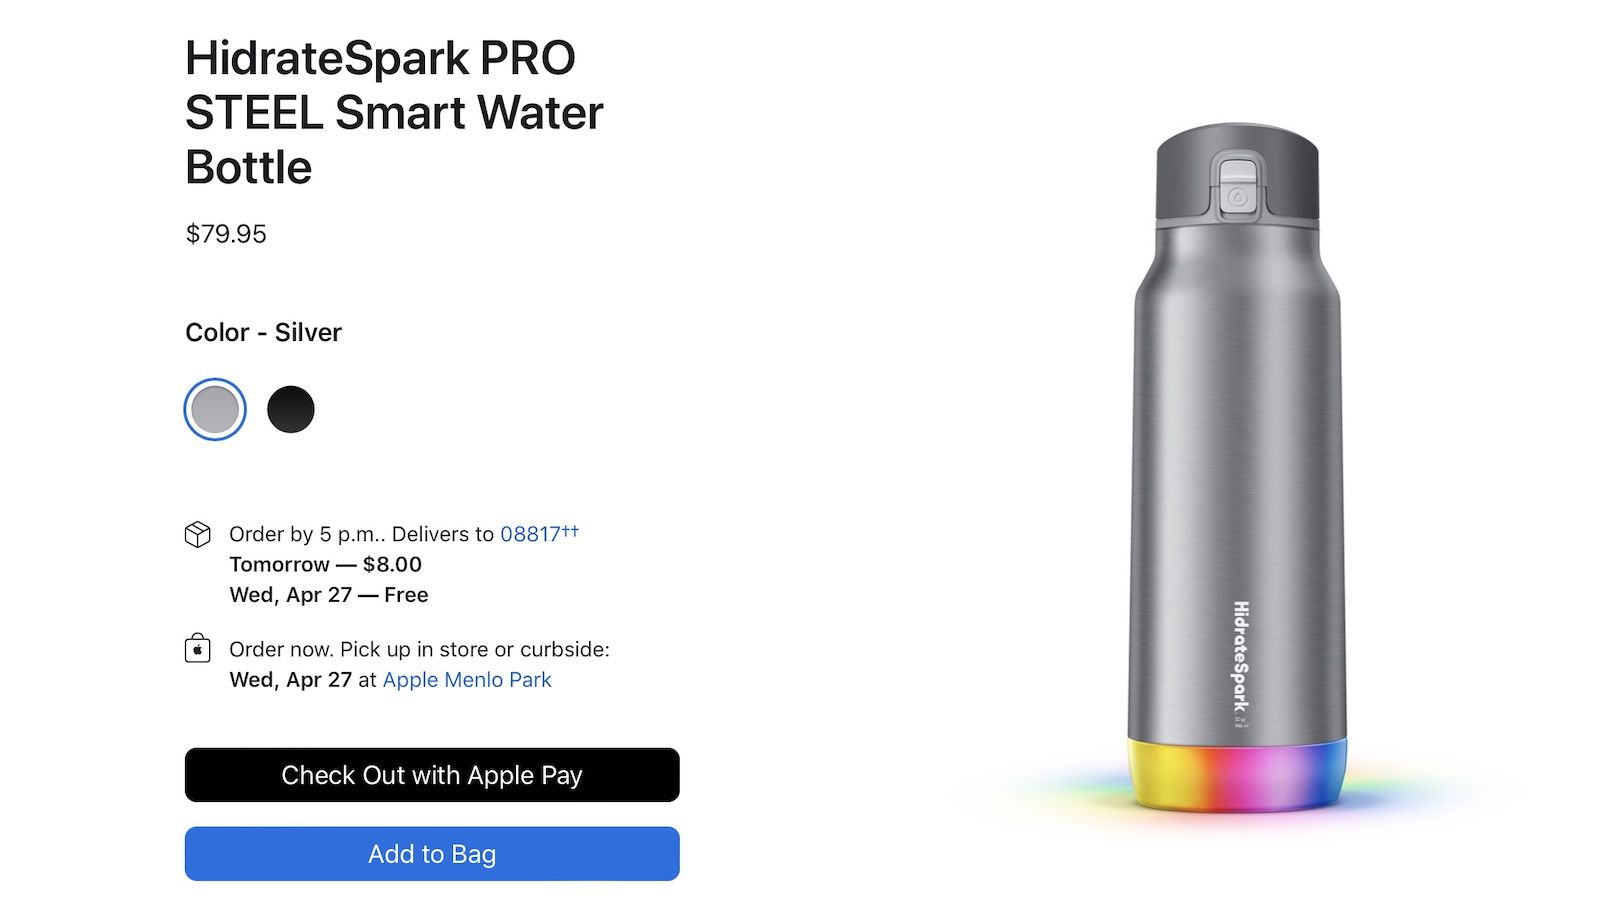 Apple Now Selling Two New HidrateSpark Smart Water Bottles With Apple Health Integration - macrumors.com